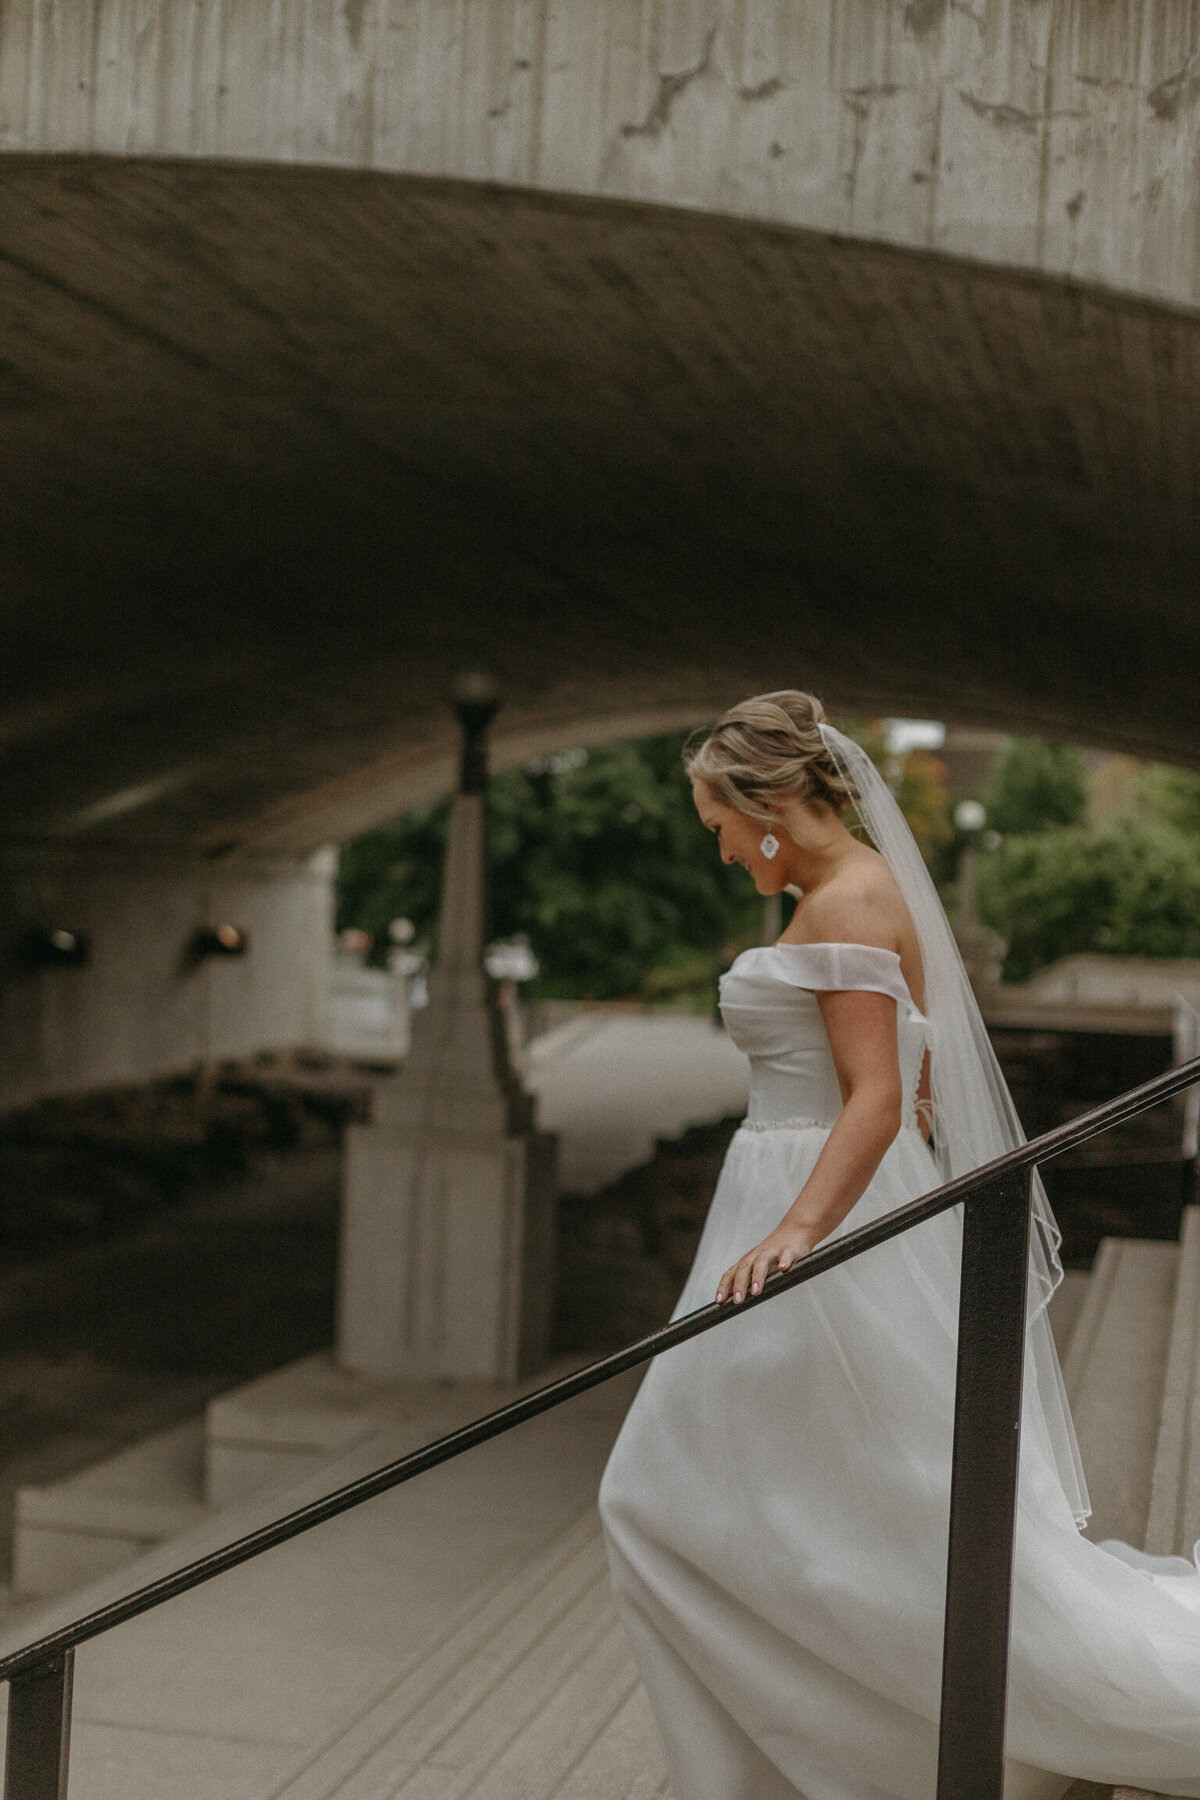 Bridal walks down stairs beside canal in downtown Ottawa for first look photos